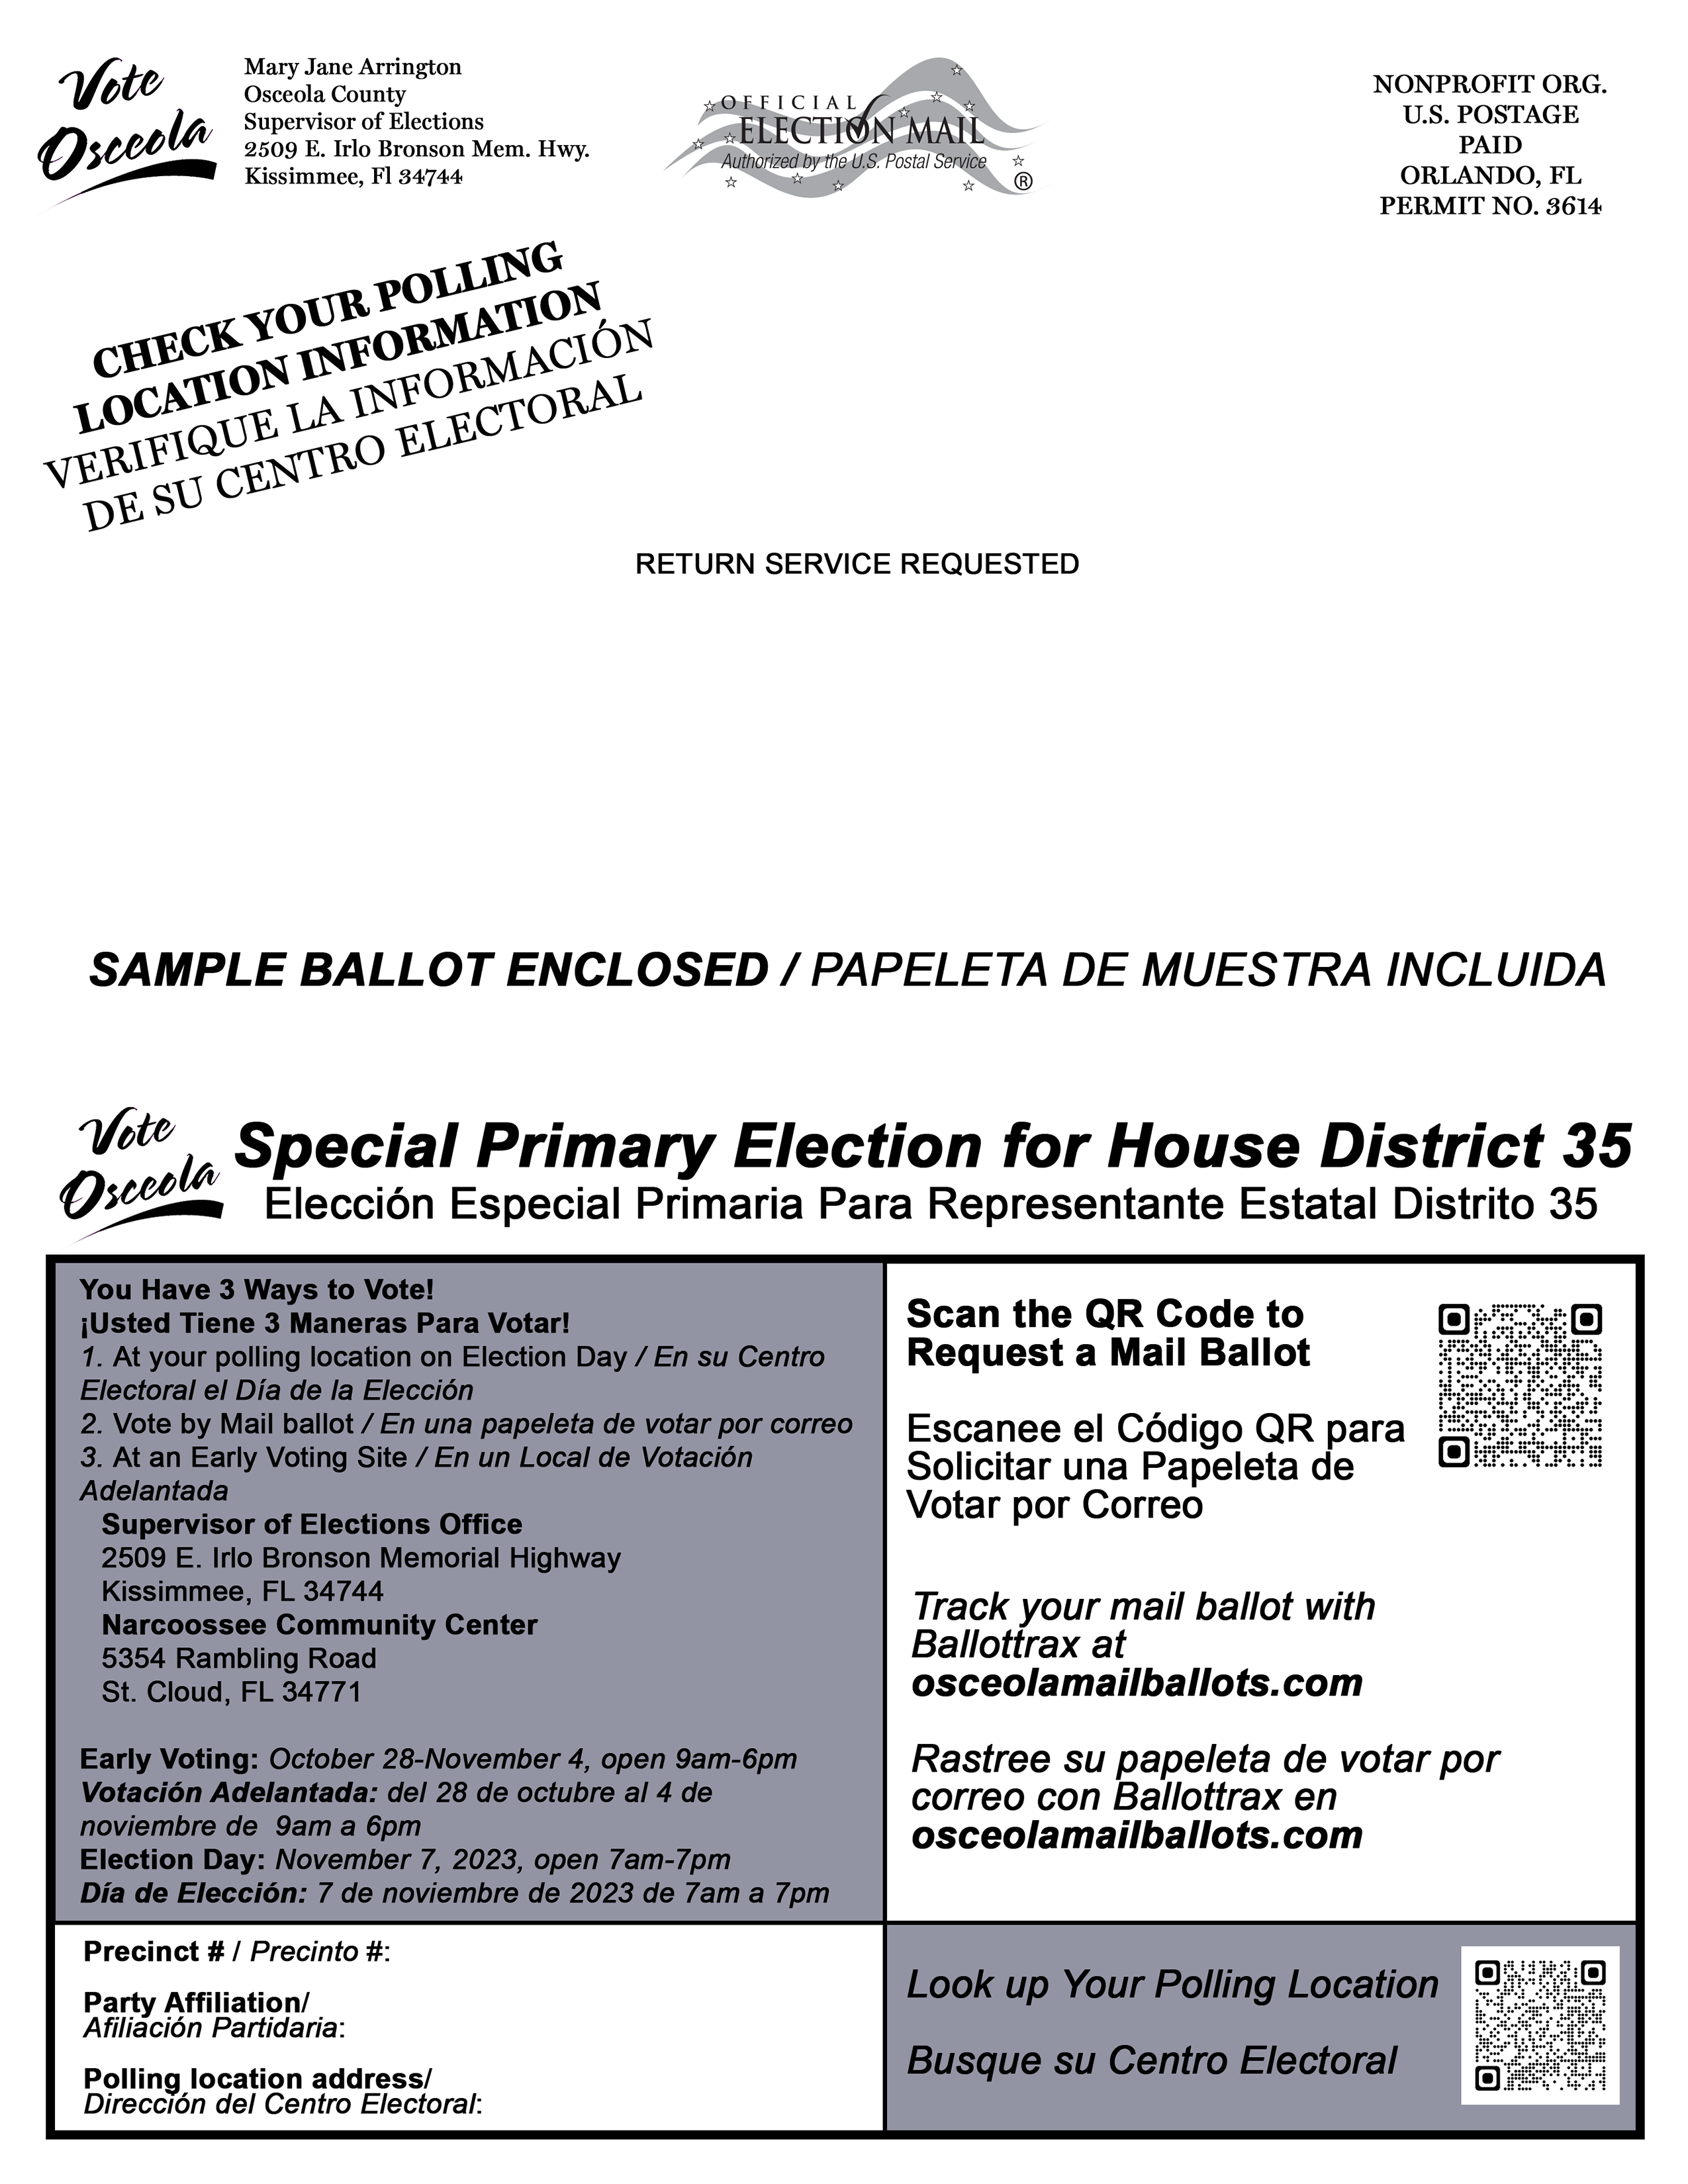 Sample Ballot - 2023 Special Primary HD 35 - 09.22.23 - Edit _2